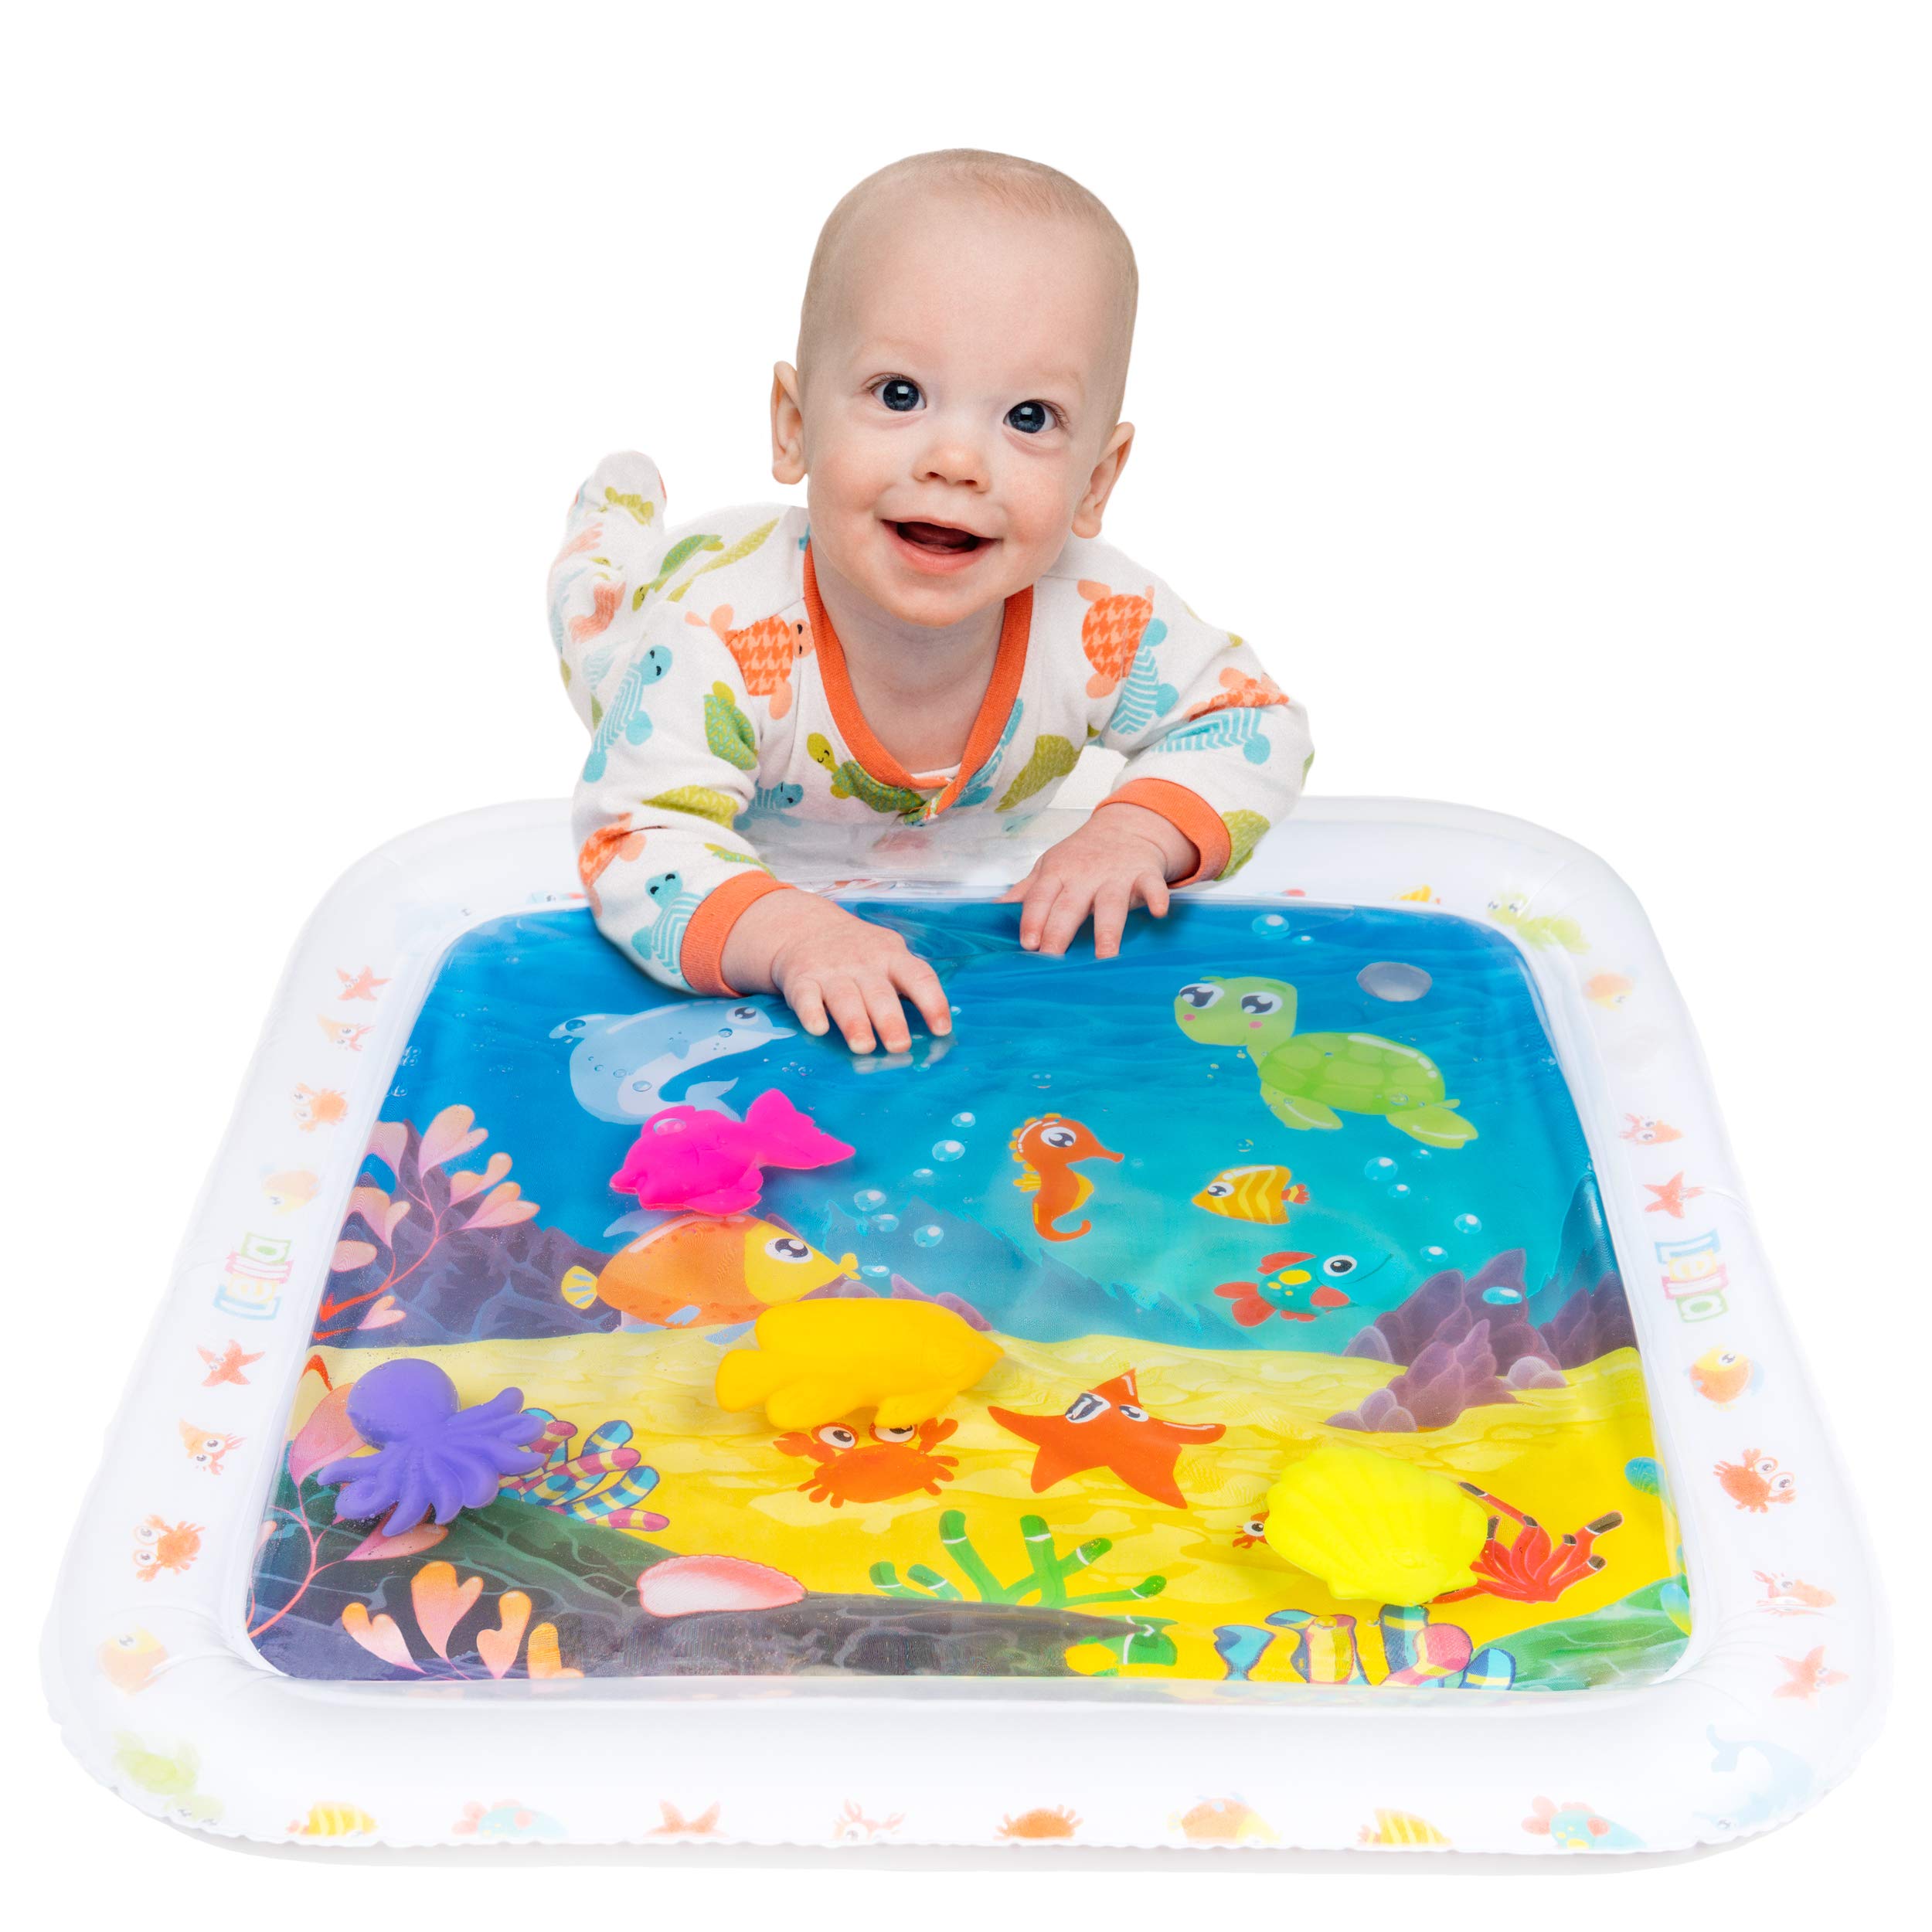 Book Cover Lella Baby & Toddler Toys - Inflatable Tummy Time Water Play Mat - Sensory Developmental Activity and Play Center - Perfect for Baby, Infant and Toddlers Growth and Stimulation - BPA Free